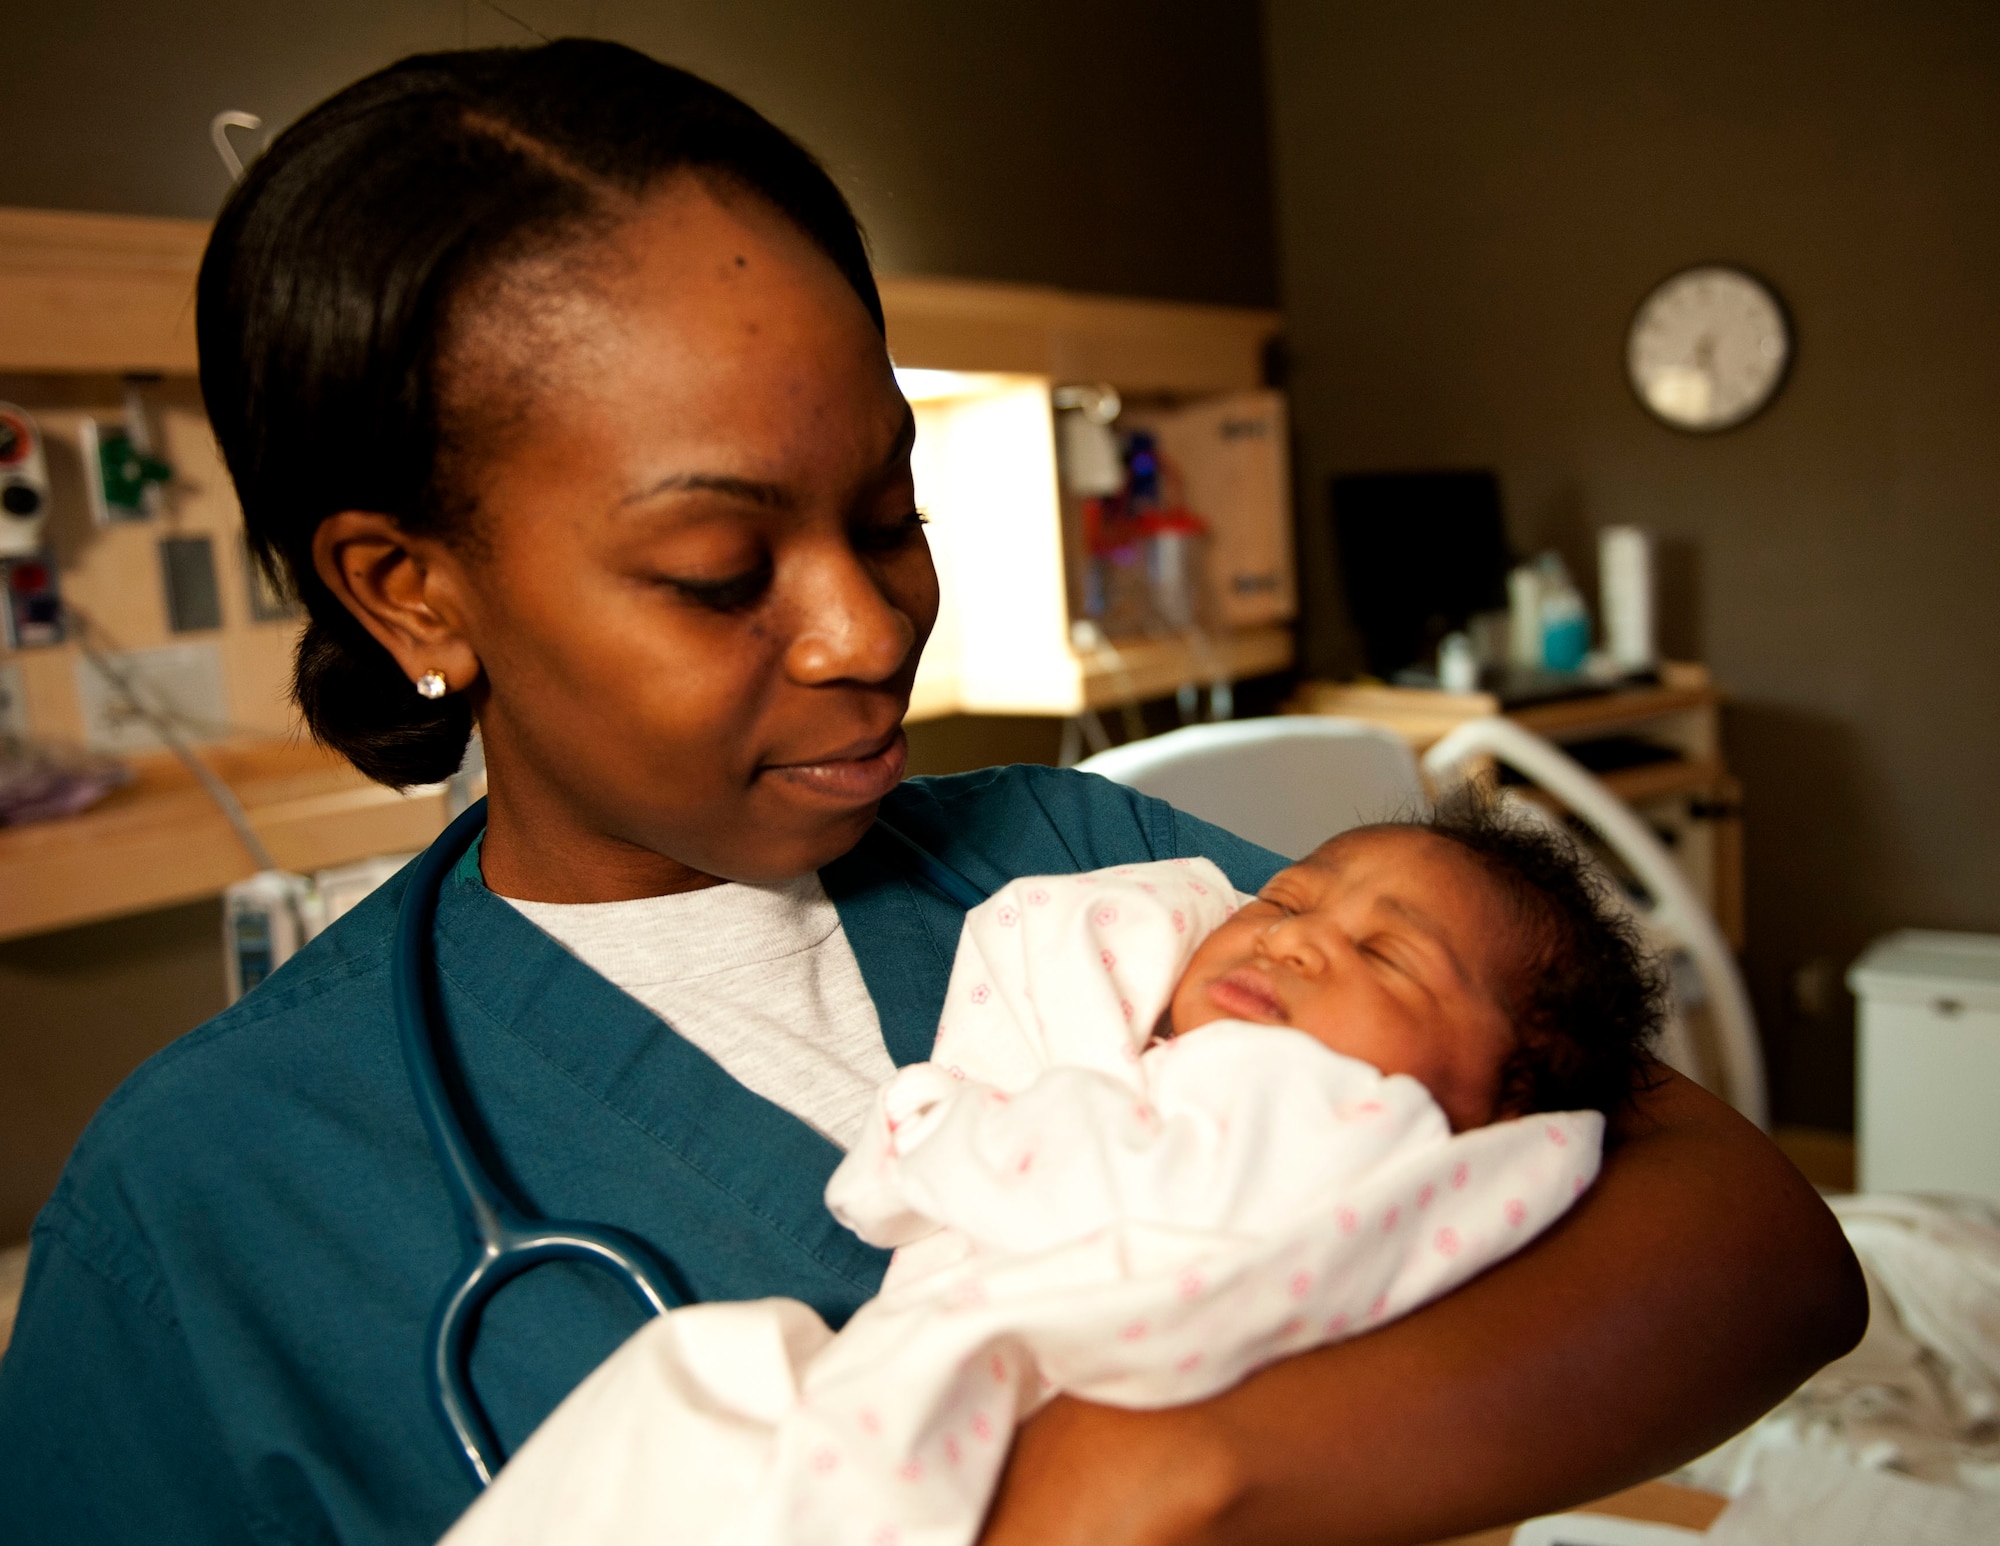 U.S. Air Force 2nd Lt. Quianna Samuels, 633rd Medical Group Labor and Deliver registered nurse, holds Guinevere Grant, the newborn daughter of Petty Officer 1st Class Xavier Grant, Patrol Coast Squadron electrician mate assigned to Joint Expeditionary Base Little Creek-Fort Story at Langley Air Force Base, Va., Jan. 30, 2014.  Samuels always had a passion to help people, as demonstrated on the evening of April 17, 2013, when she provided first-responder efforts to residents impacted by the fertilizer plant explosion in West, Texas. (U.S. Air Force photo by 2nd Lt. Brooke Betit/Released)